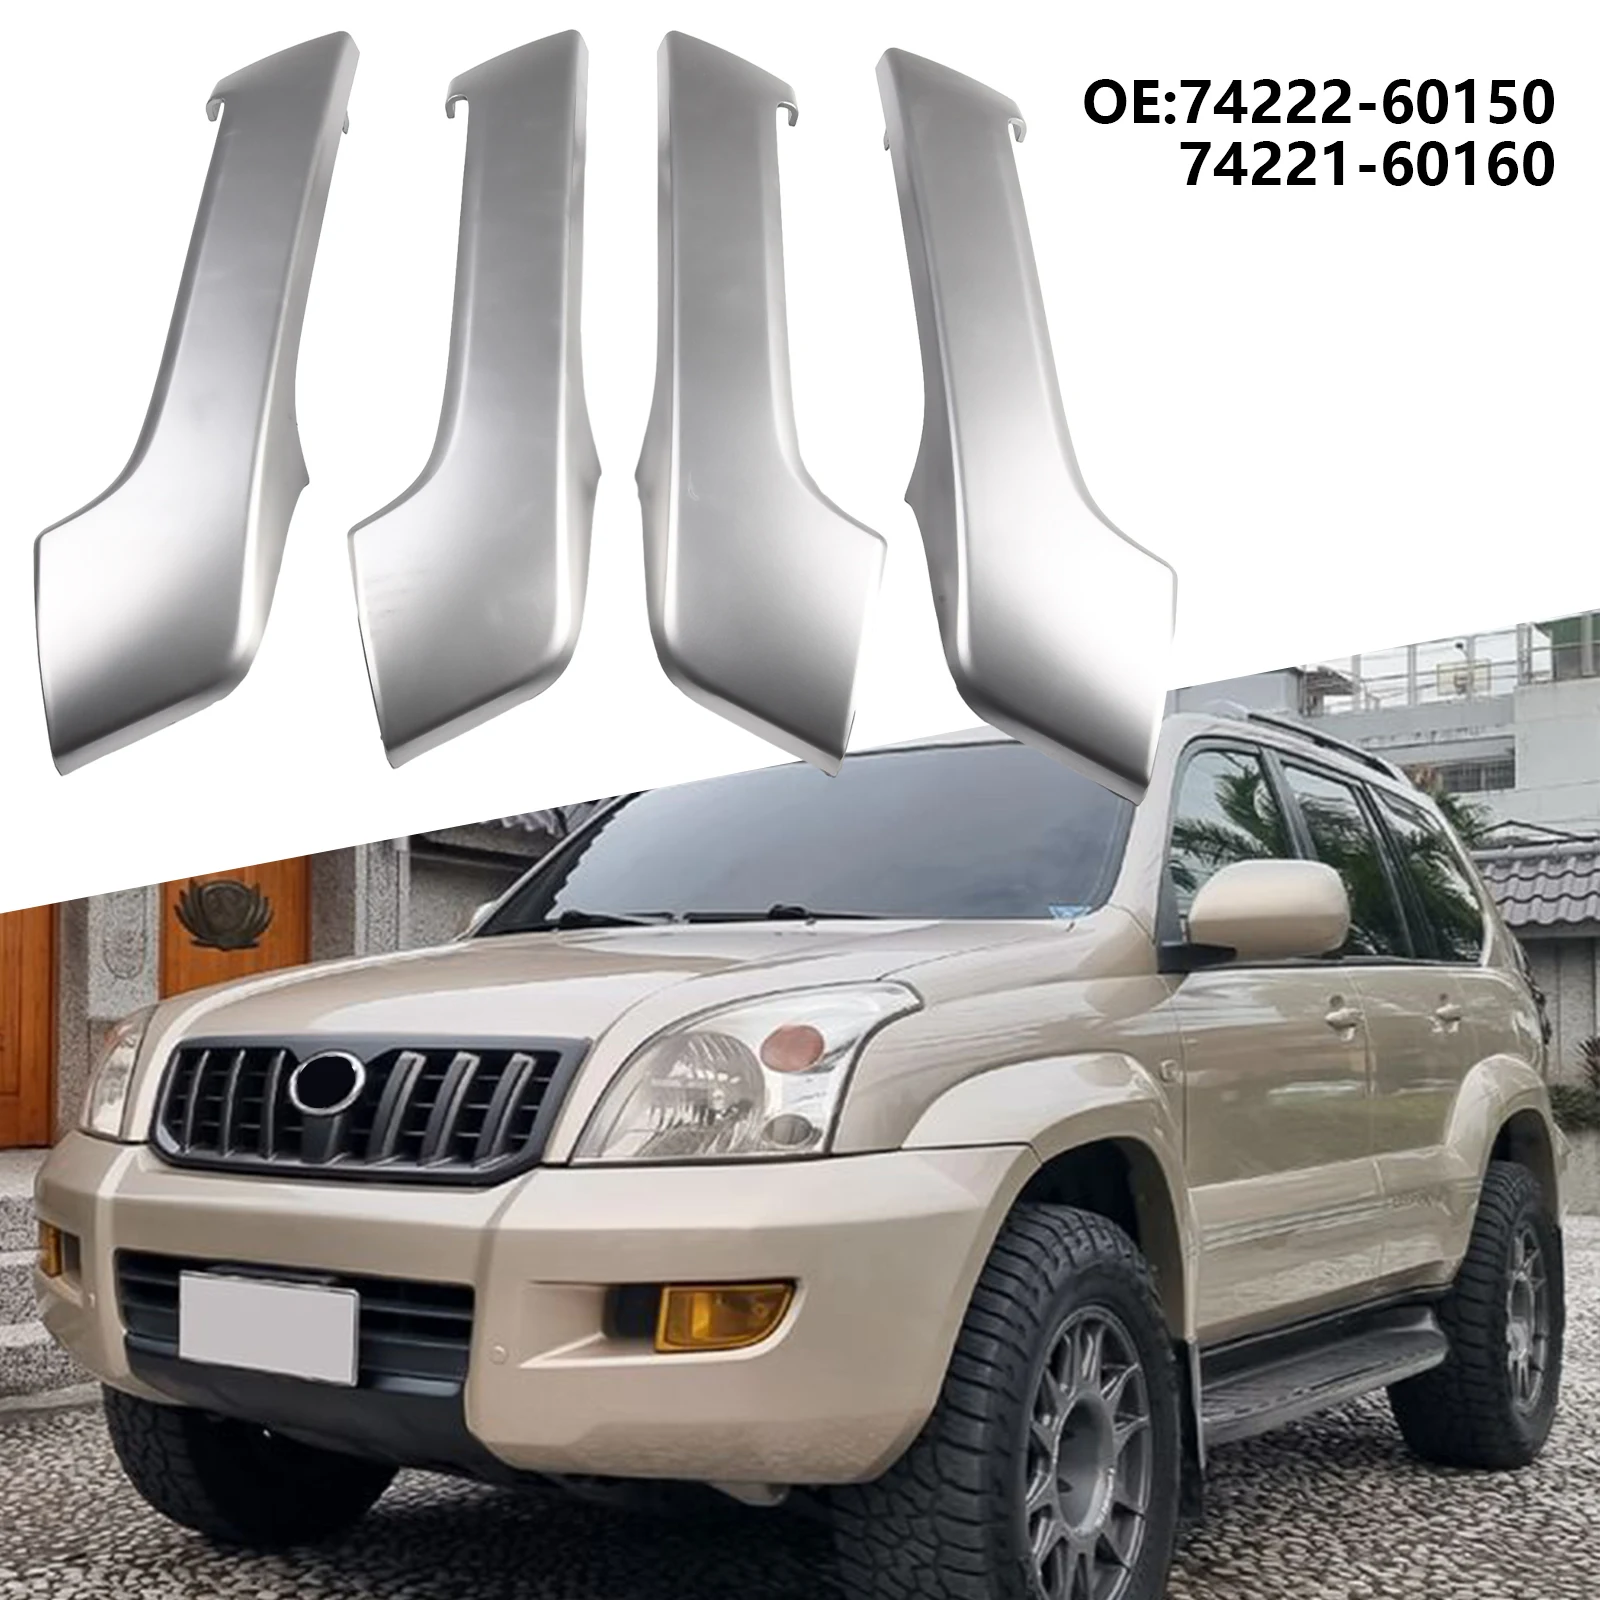 

2 Pairs Of Door Handle Covers For Toyota 150 2010-2017 For Land 150 2010-2017 OE 74222-60150 74221-60160 Direct Installation